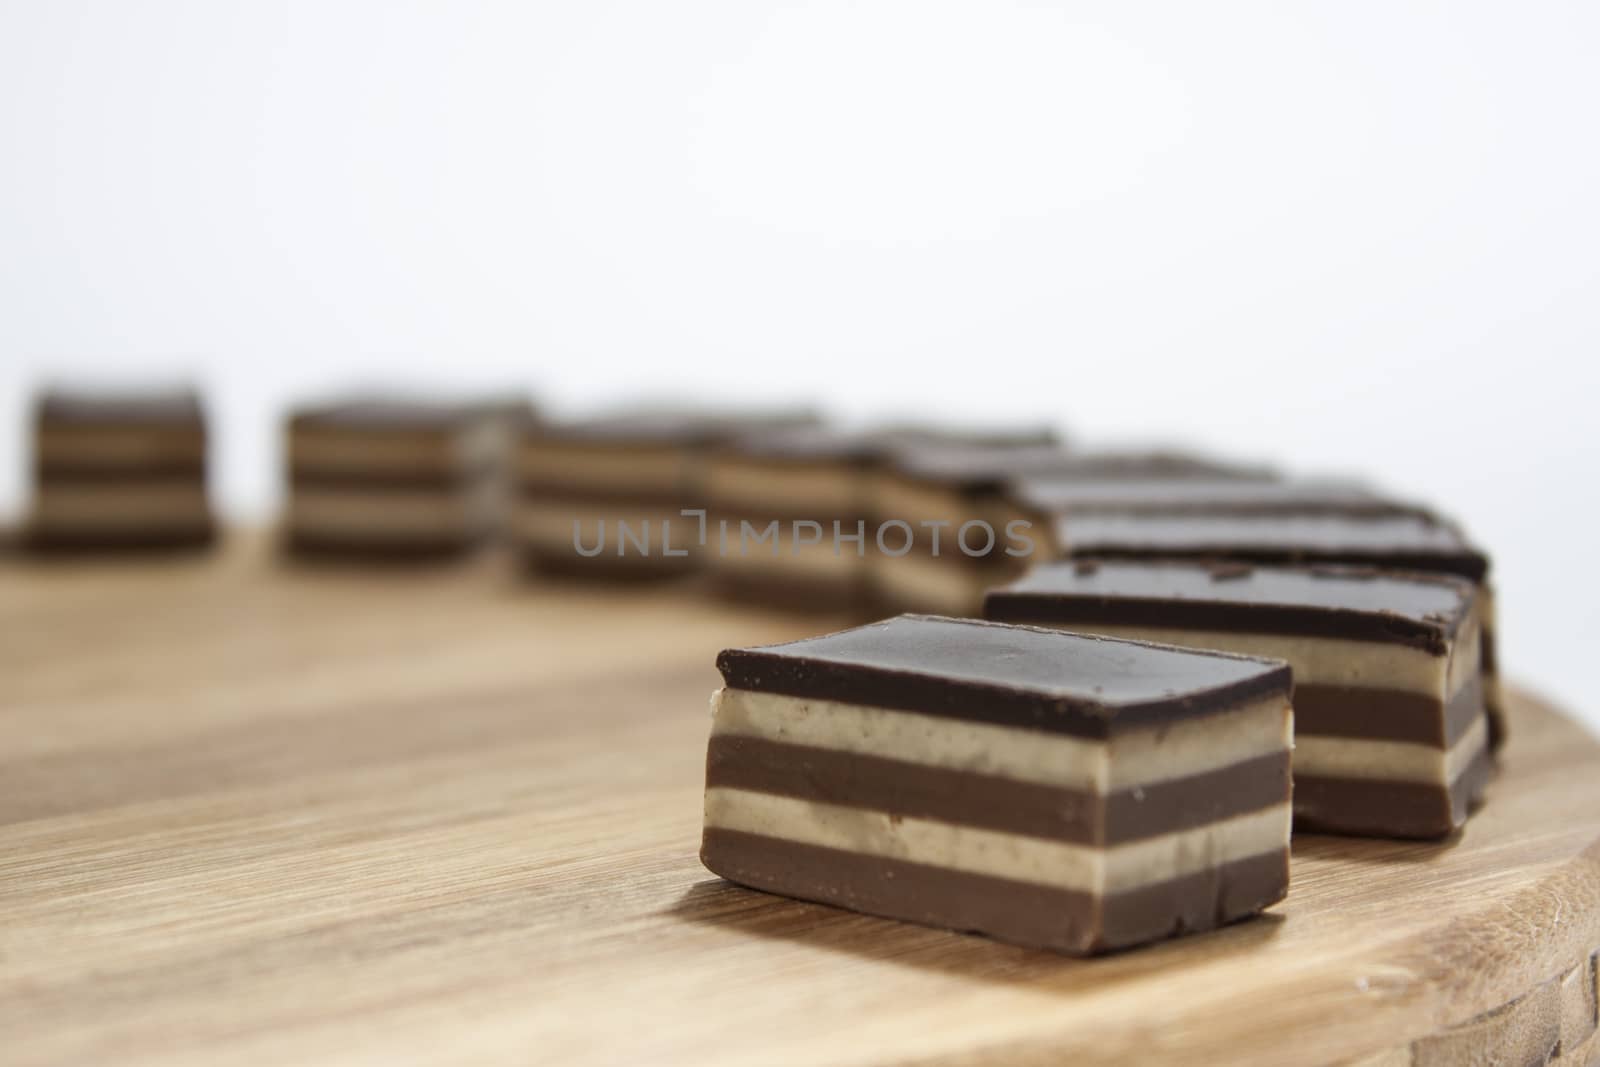 Chocolate cakes lined up on the wooden board.